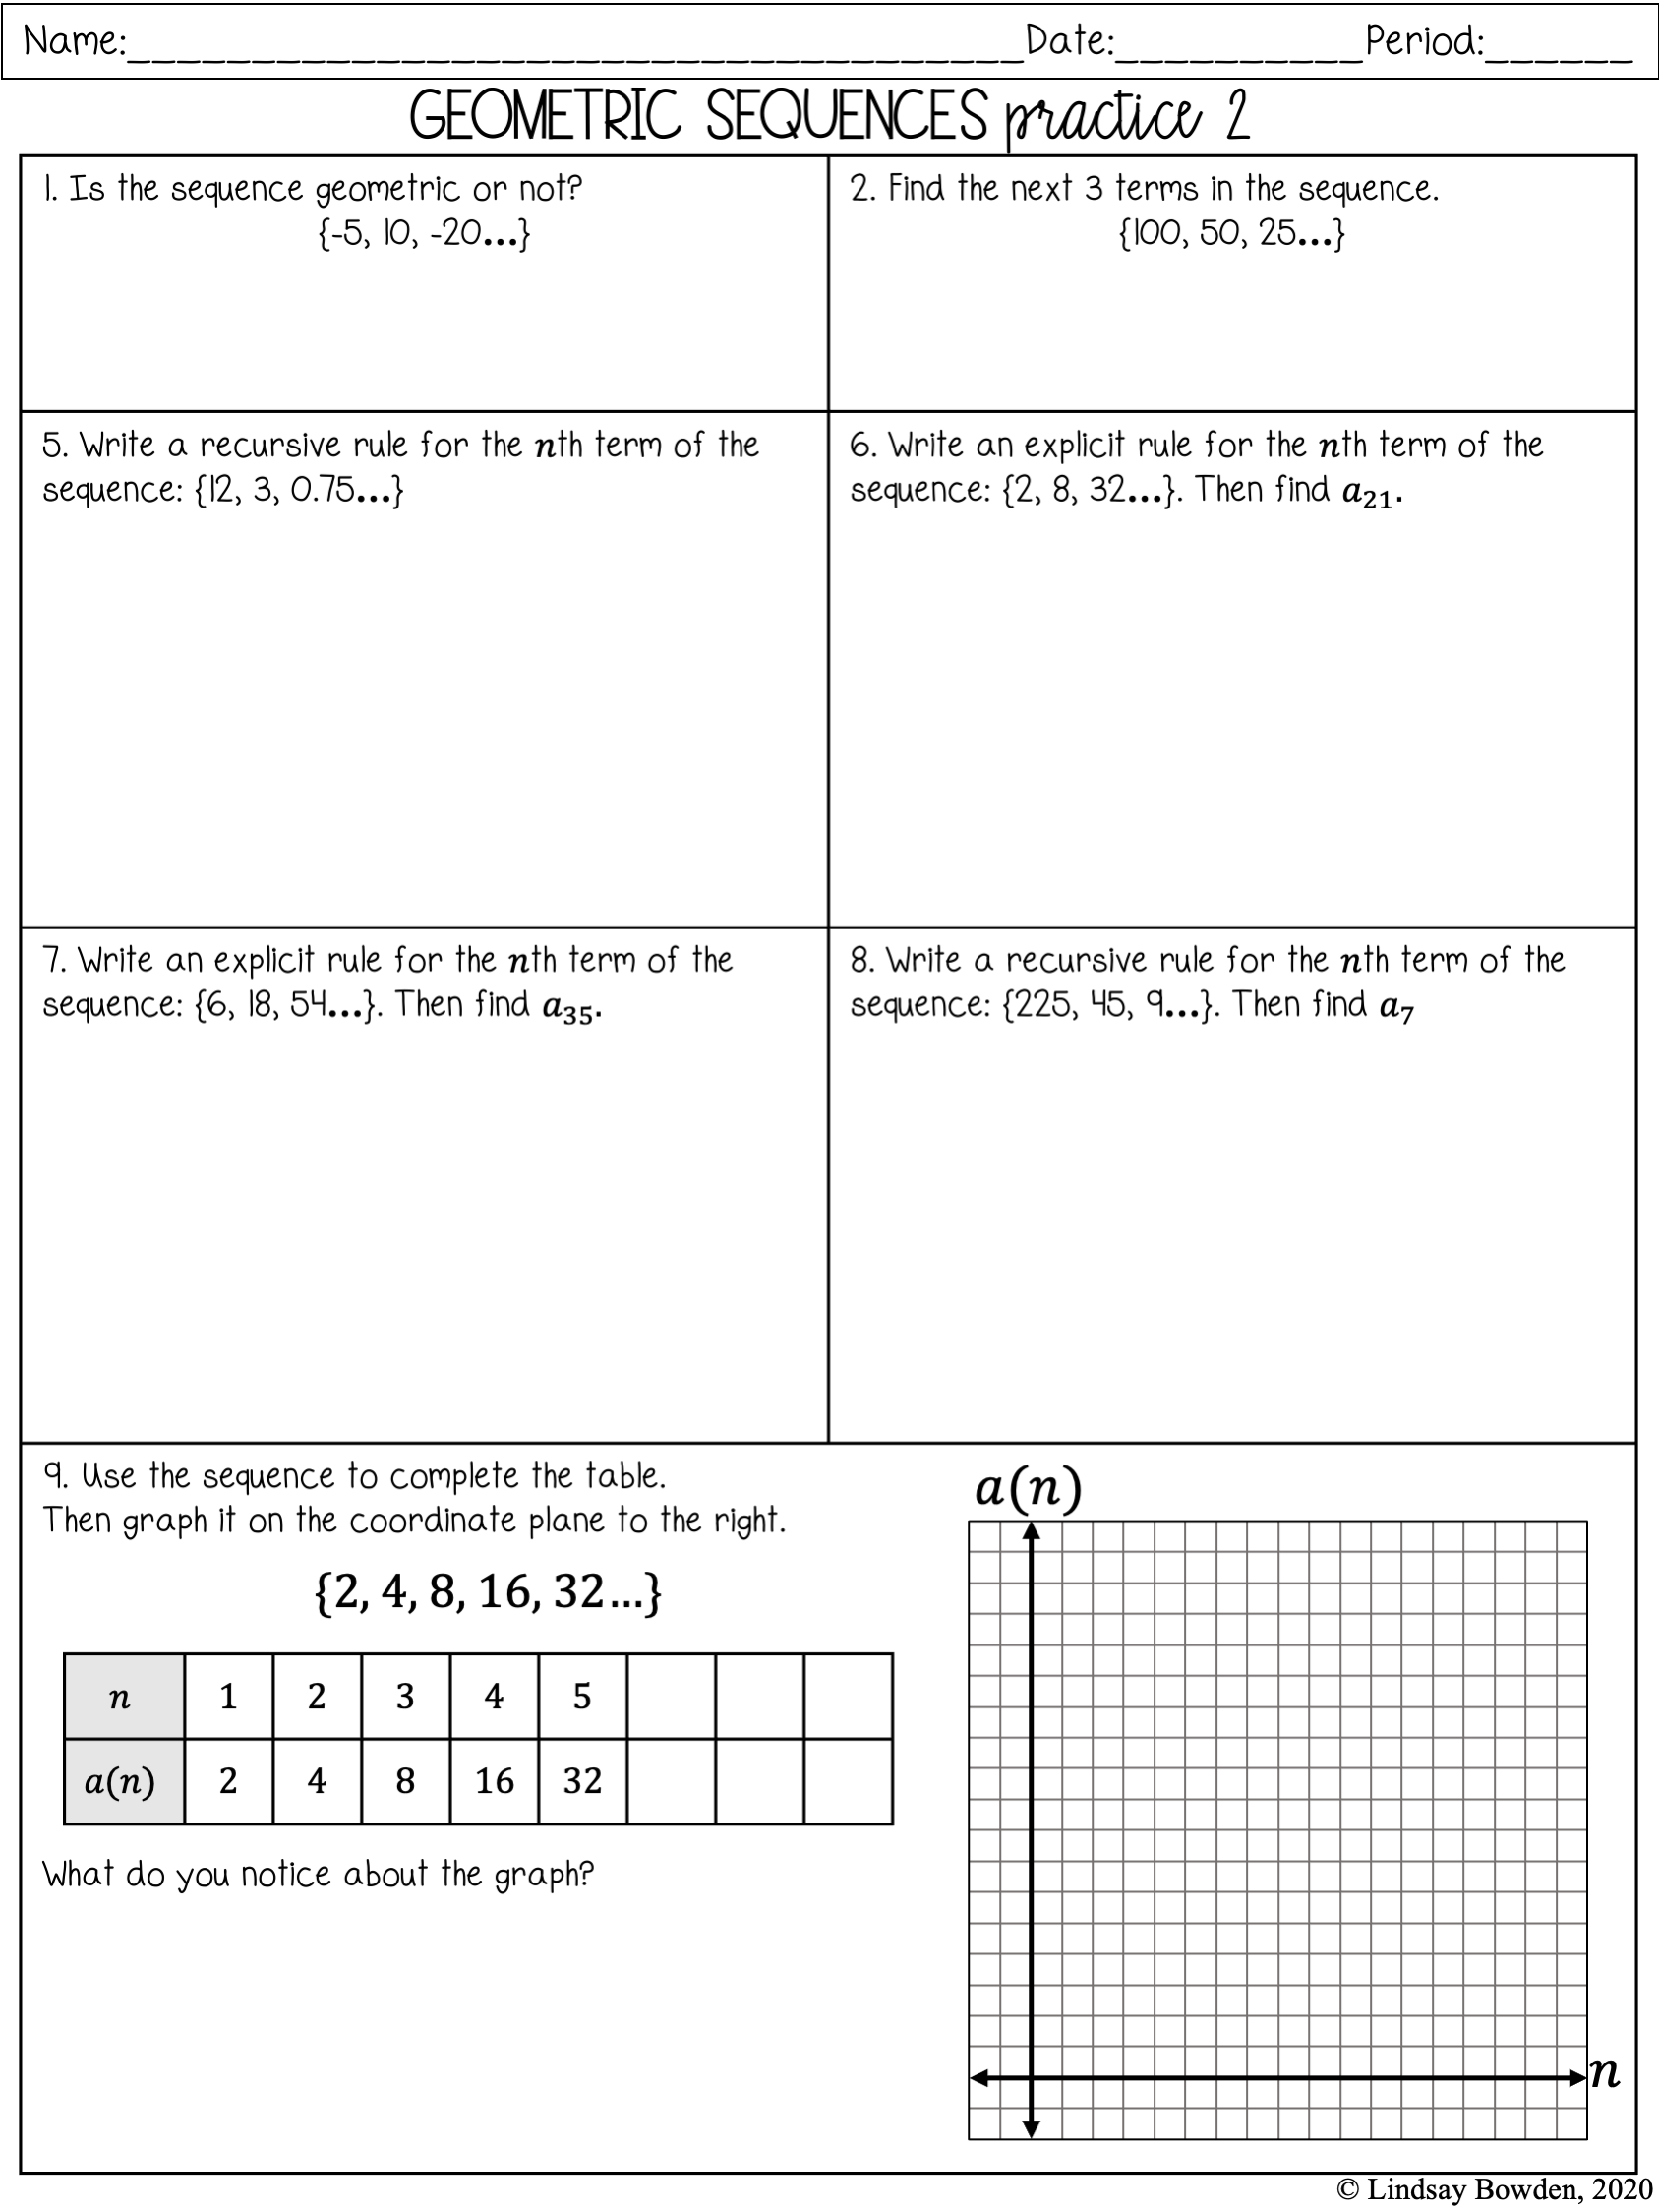 Geometric Sequences Notes and Worksheets - Lindsay Bowden Intended For Geometric Sequences Worksheet Answers